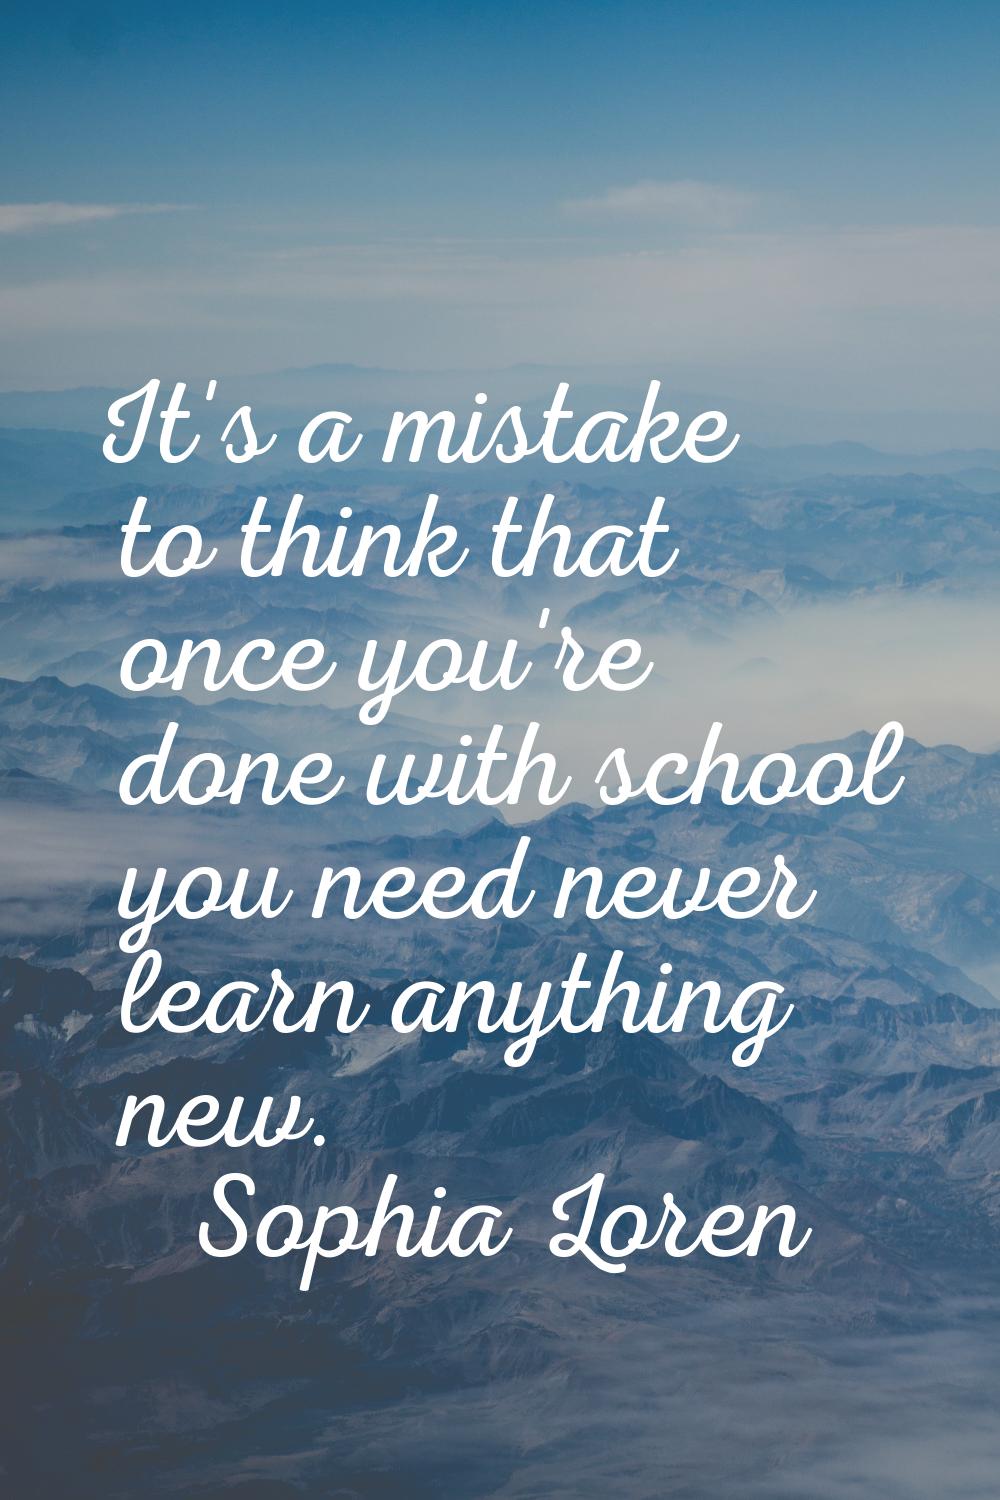 It's a mistake to think that once you're done with school you need never learn anything new.